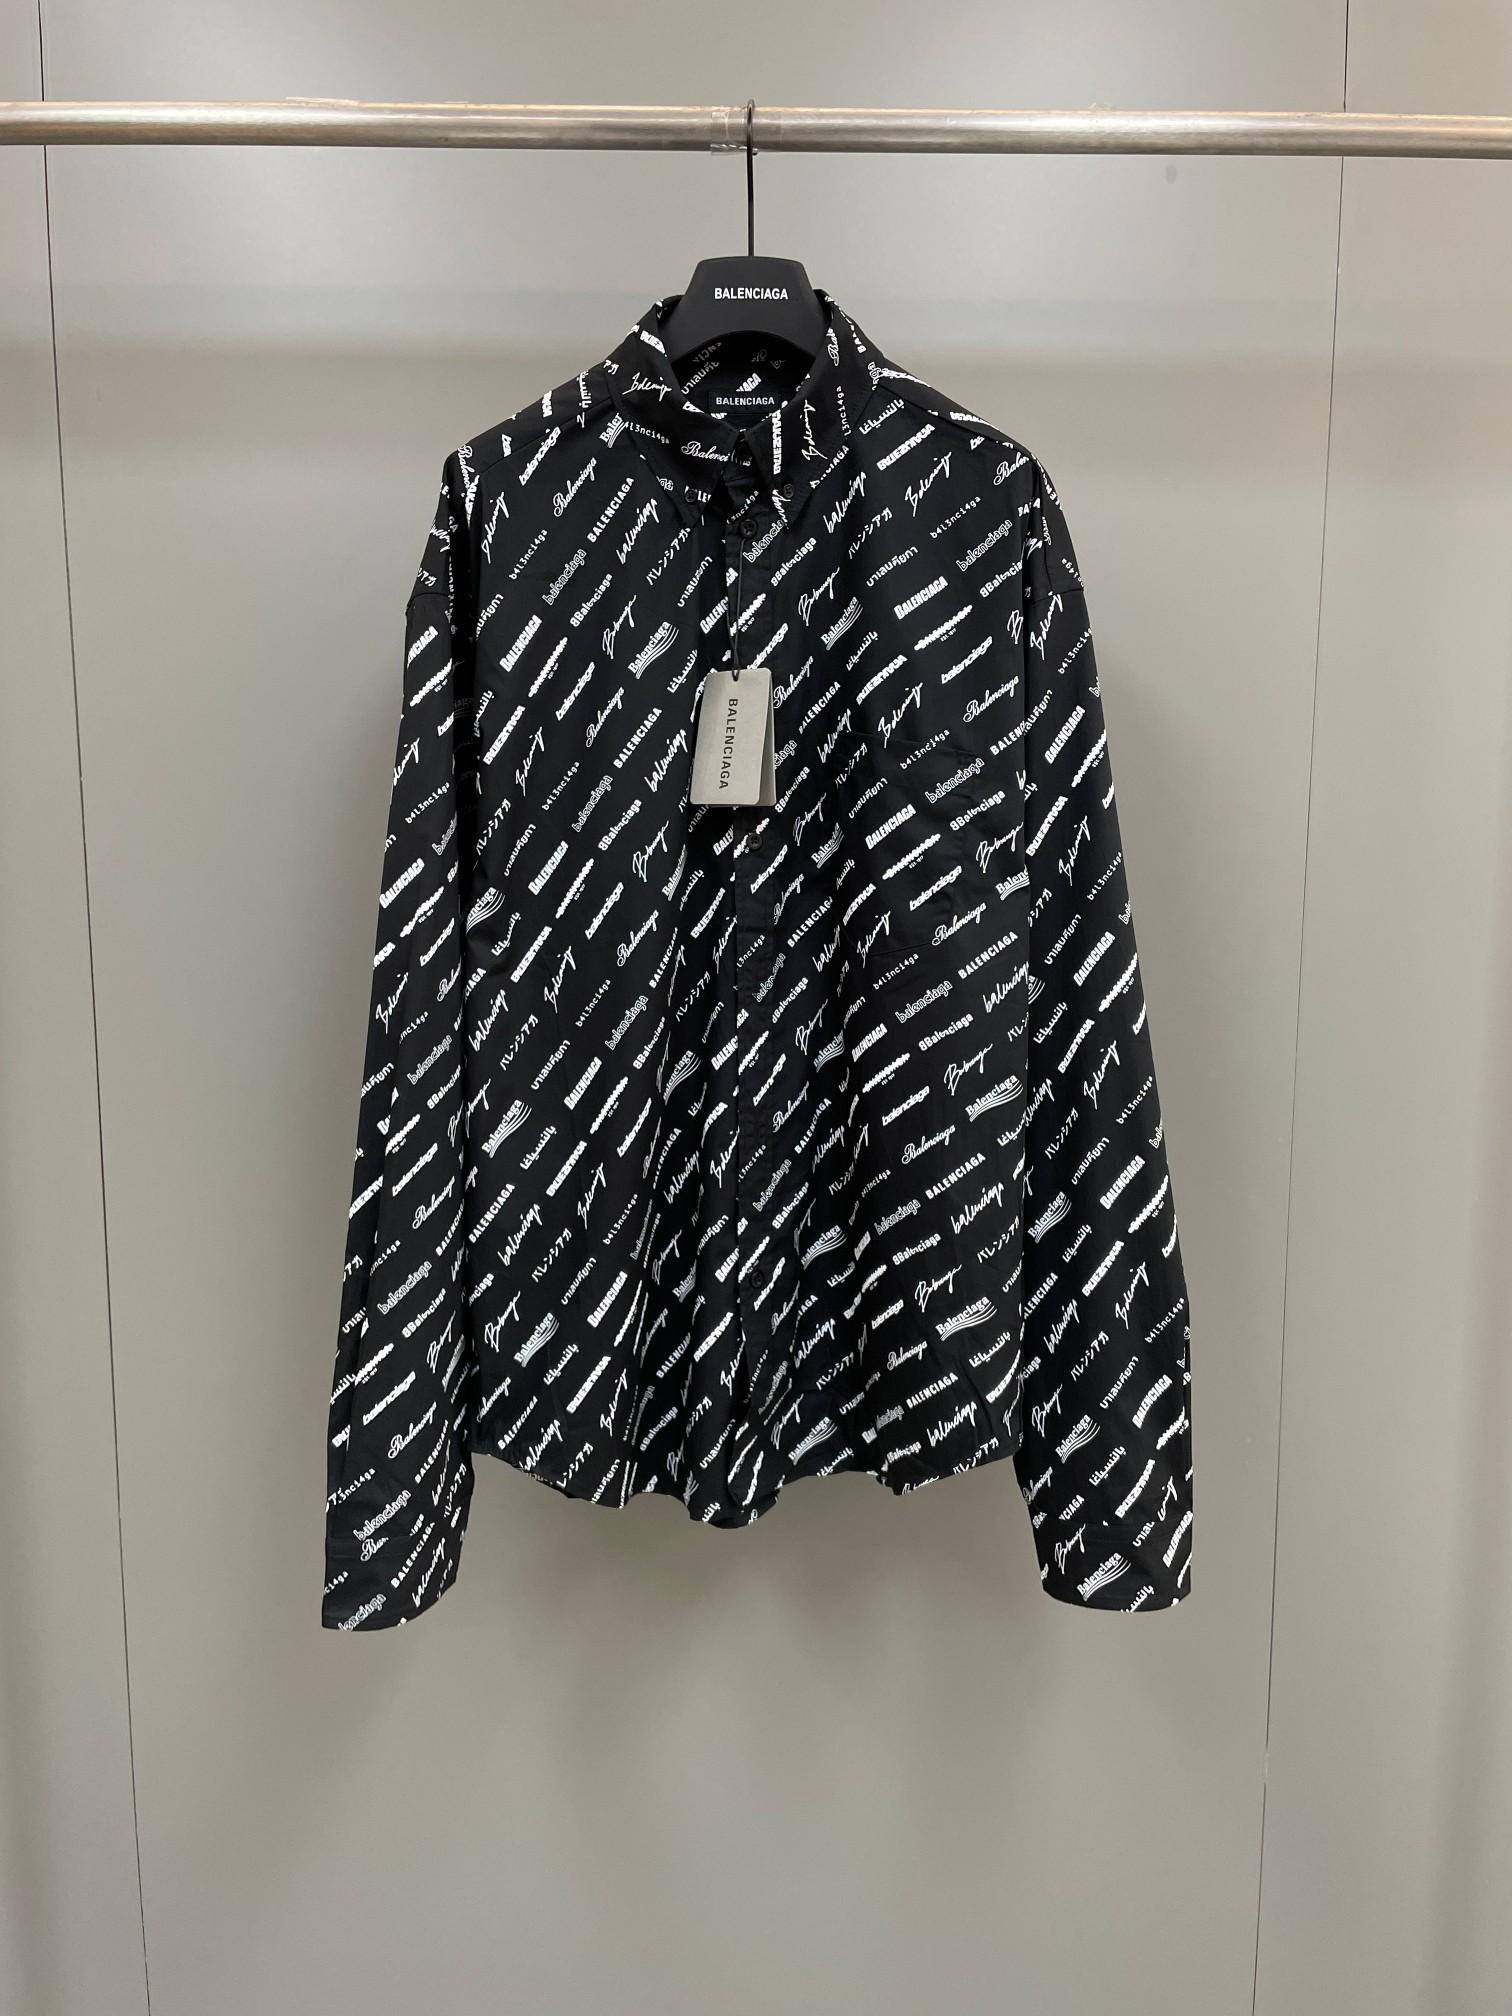 logomania-all-over-shirt-large-fit-7438_16844051122-1000